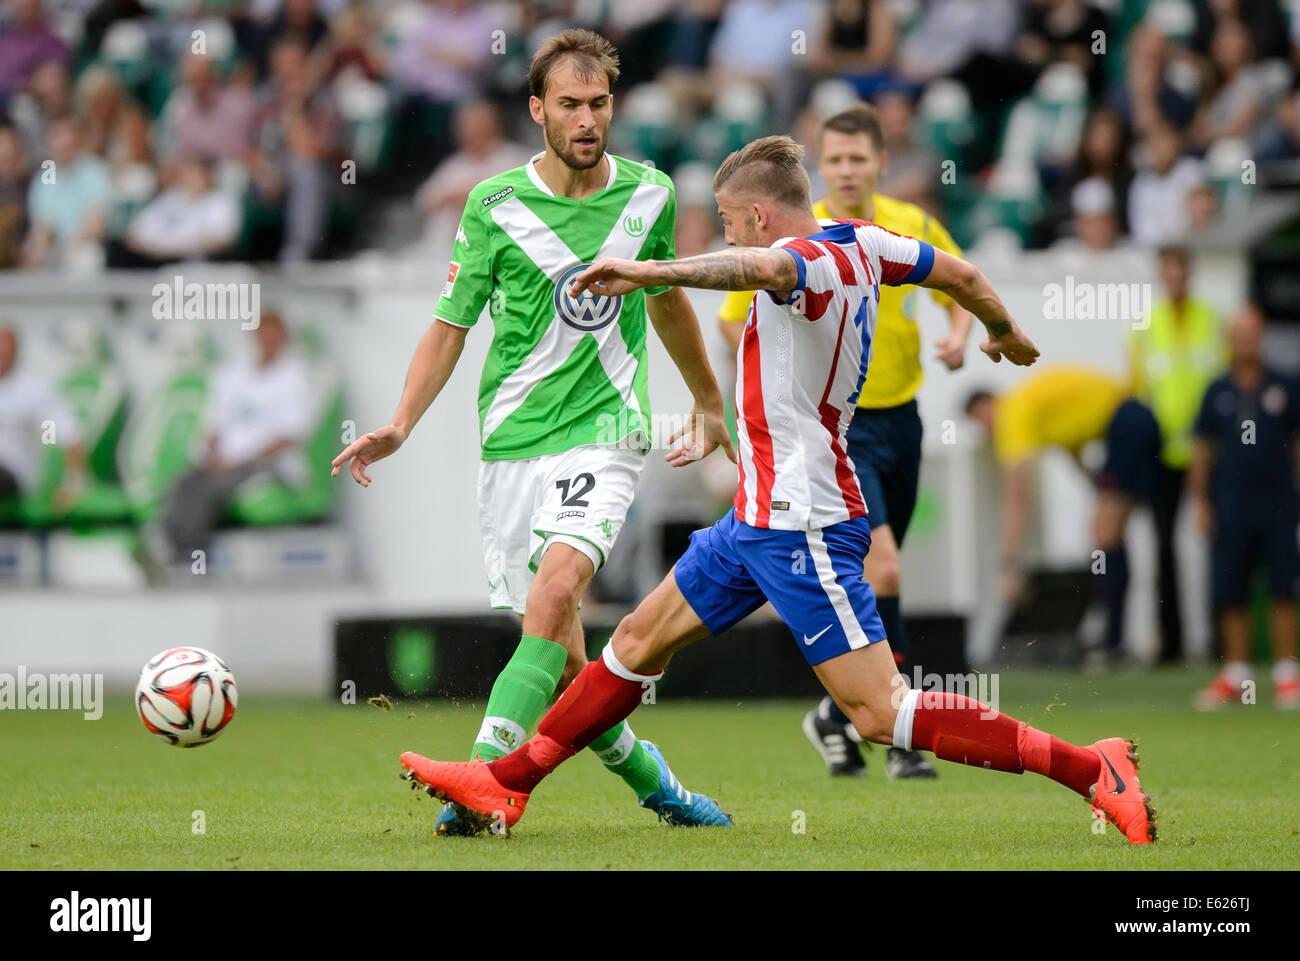 Wolfsburg, Germany. 10th Aug, 2014. Wolfsburg's Bas Dost (L) and Madris's Toby Alderweireld in action during the soccer test match between VfL Wolfsburg and Atletico Madrid at Volkswagen Arena in Wolfsburg, Germany, 10 August 2014. Photo: Thomas Eisenhuth/dpa/Alamy Live News Stock Photo